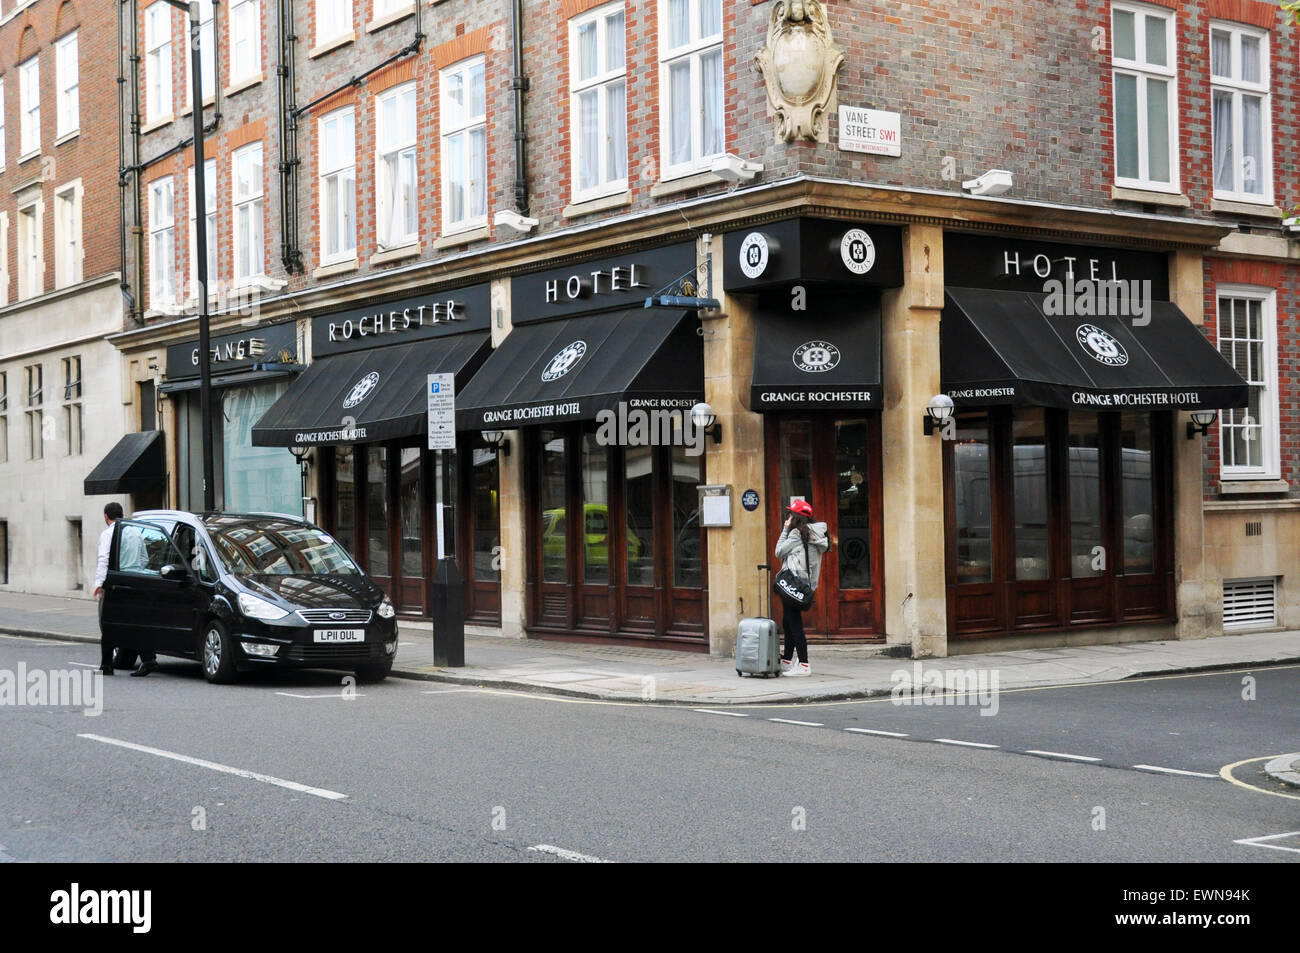 Rochester Hotel Rochester Rd Westminster London Foto Stock